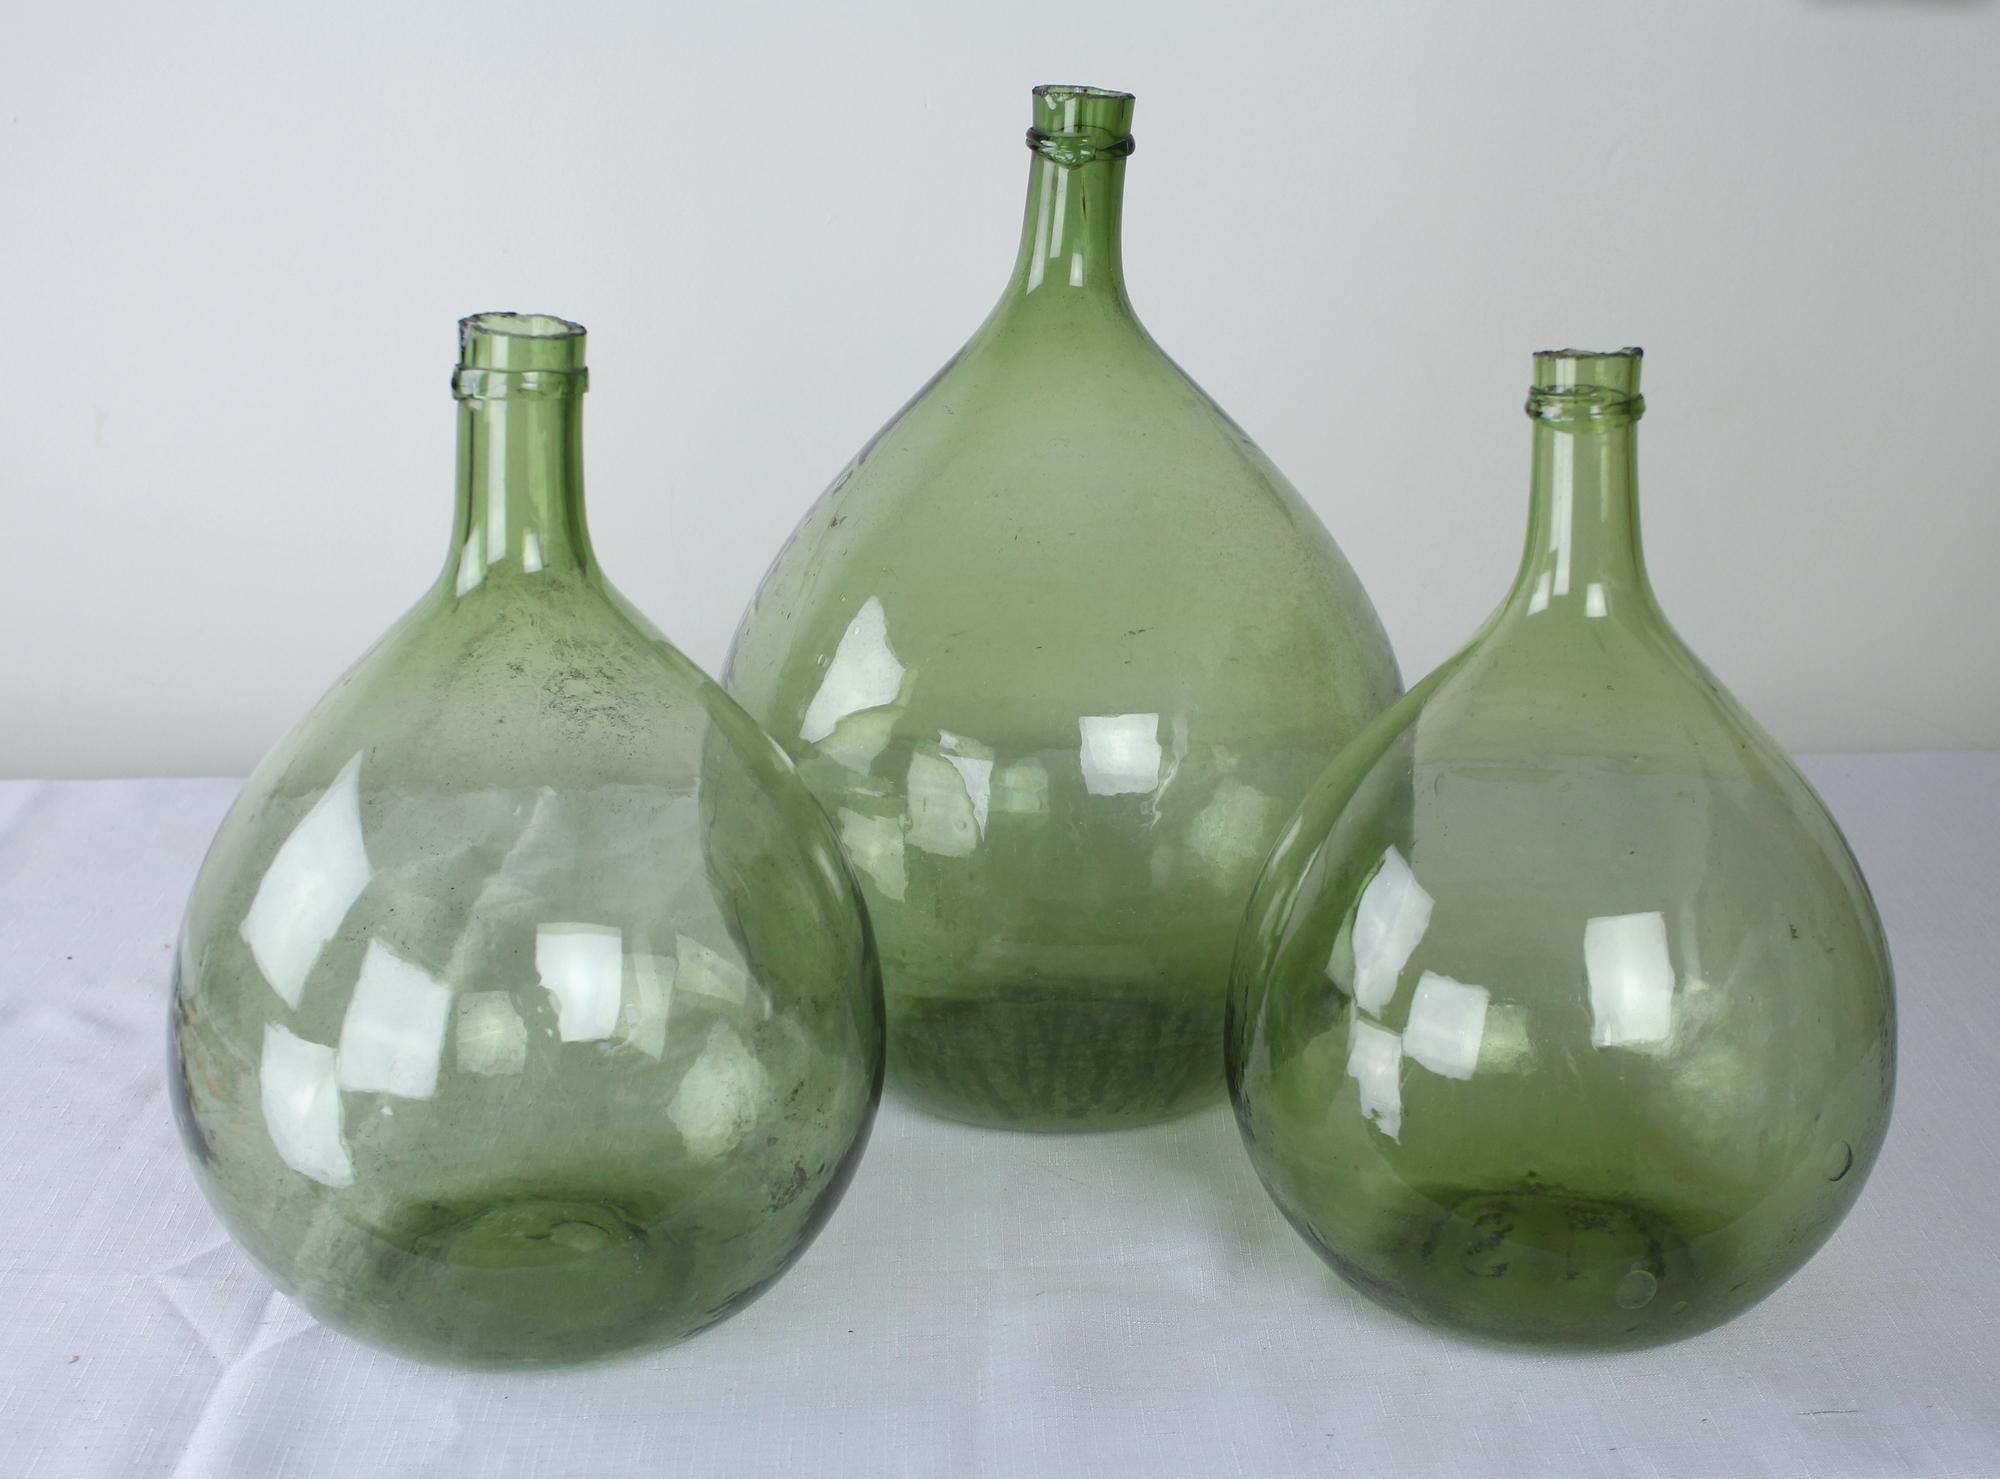 A collection of three olive colored glass demijohn bottles, used from the late 17th Century through the 19th Century to carry wine and spirits. Handblown, each has their own unique characteristics, from the tilt of the gooseneck to the trapped air